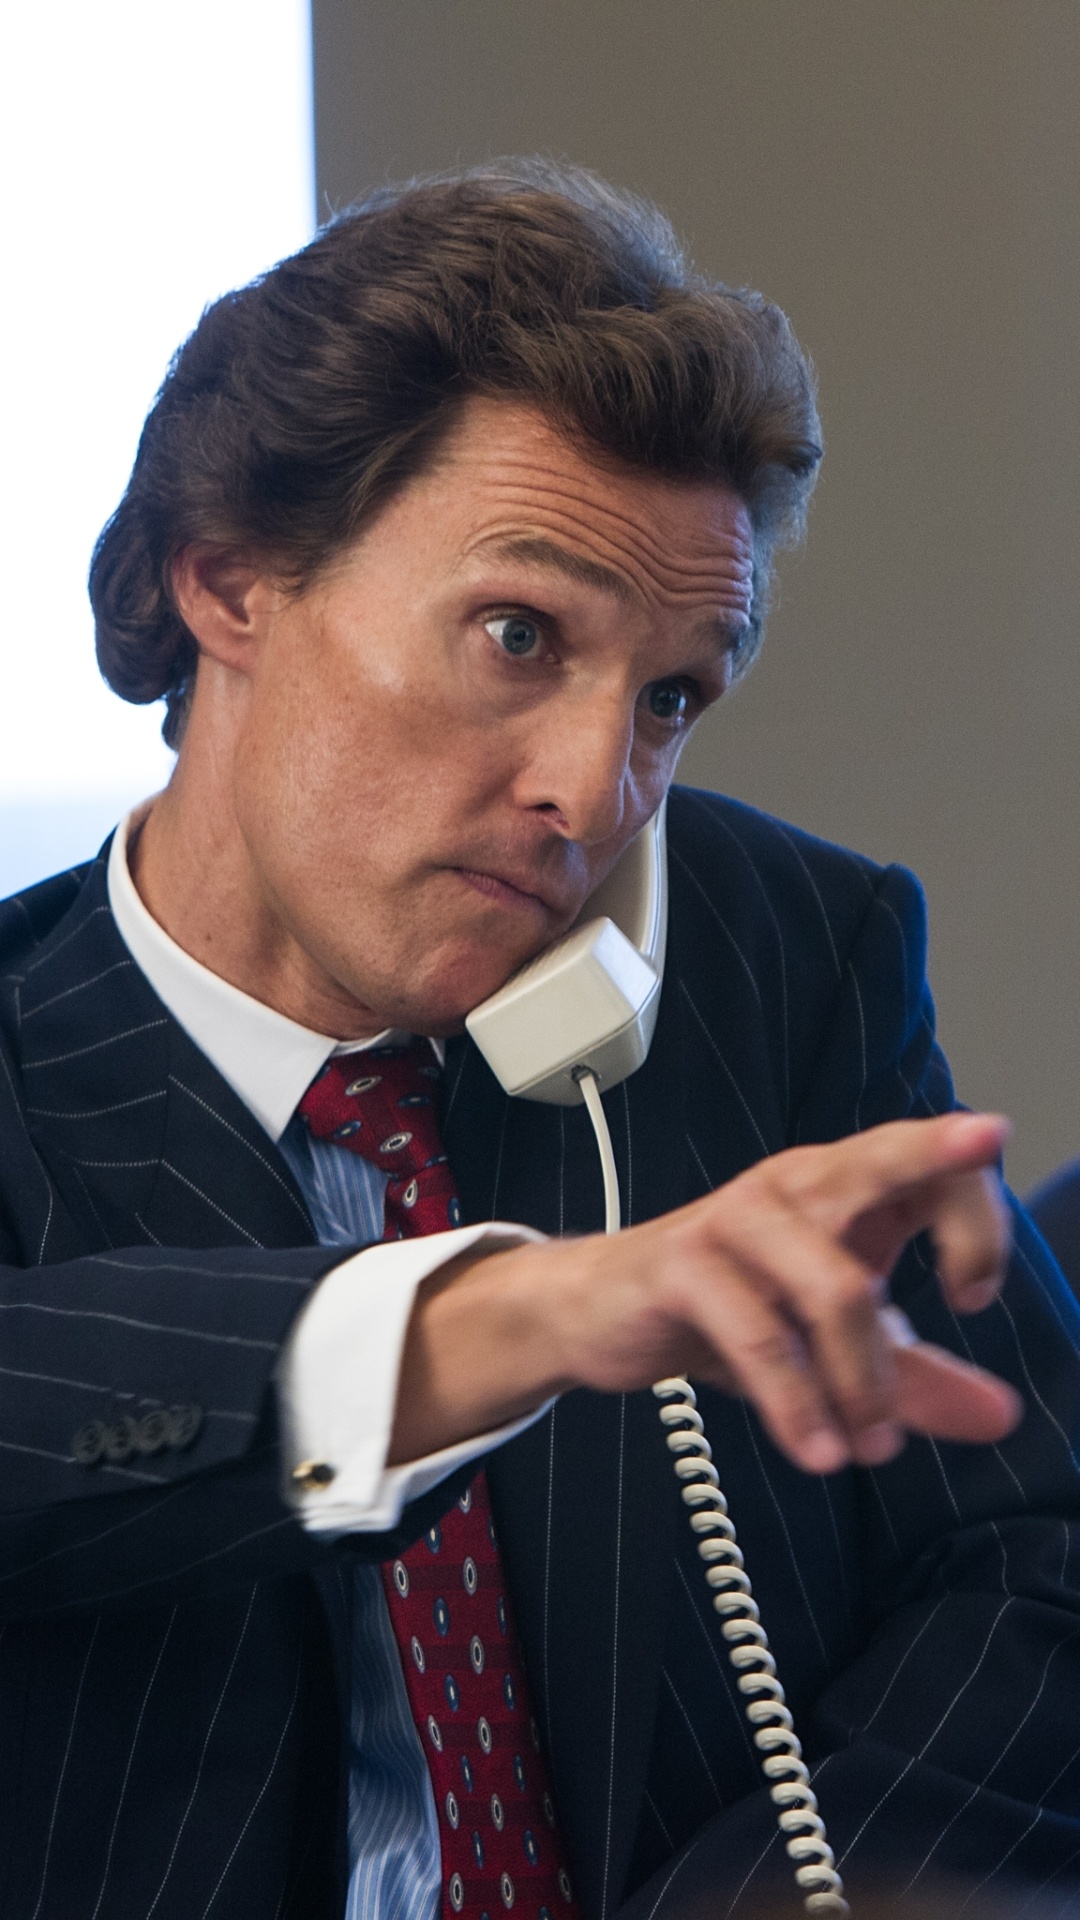 The Wolf of Wall Street: Matthew McConaughey as Mark Hanna, A supporting role. 1080x1920 Full HD Background.